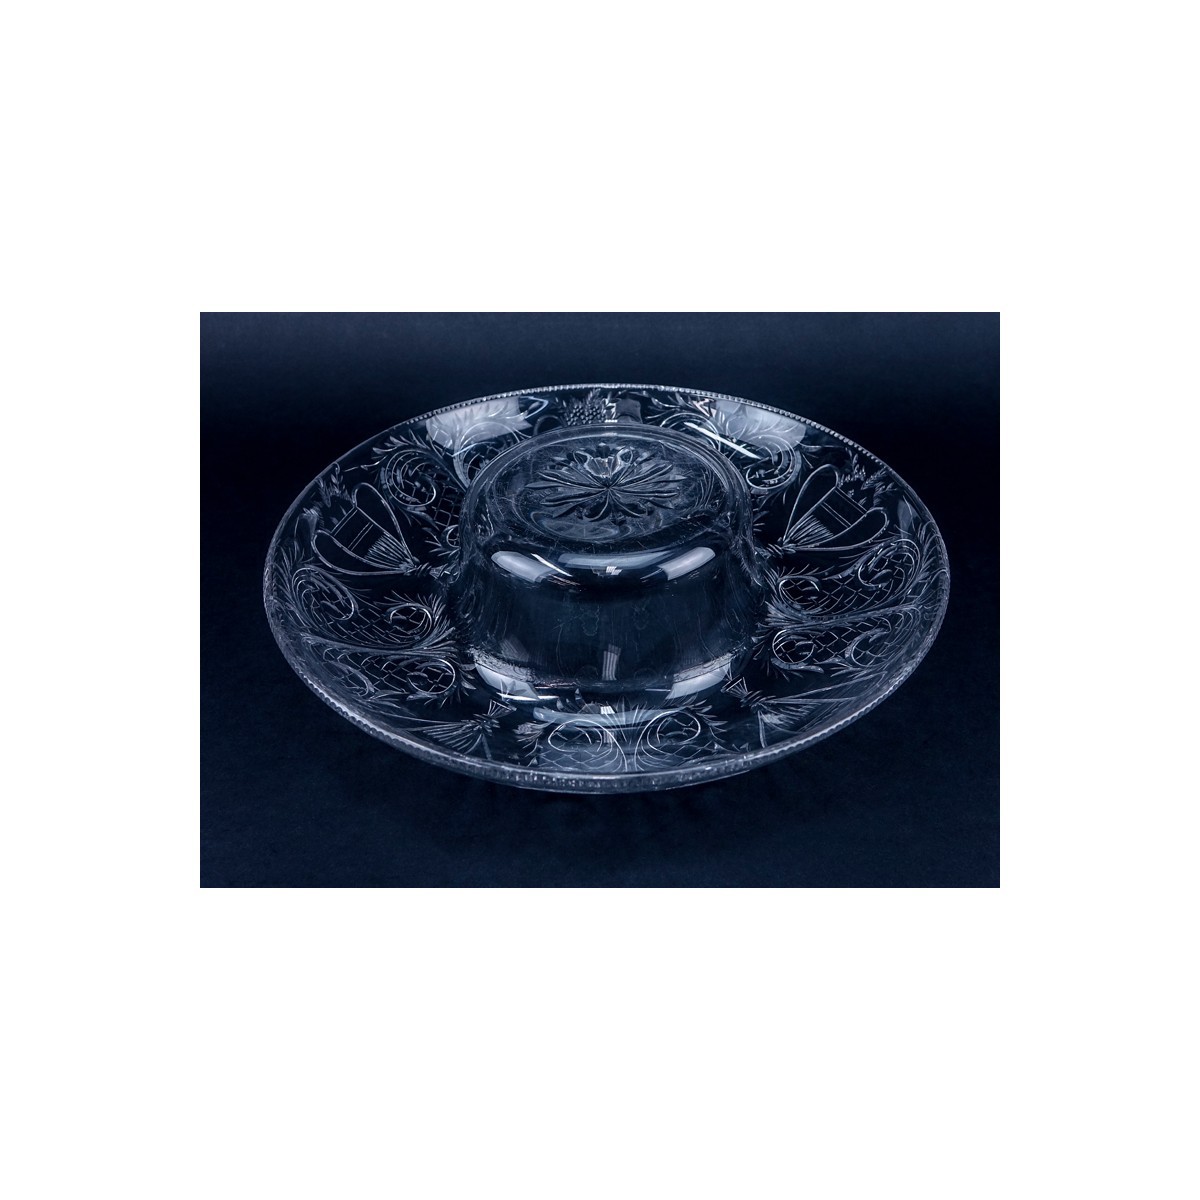 Hawkes Style Round Crystal Bowl. Typical scuffs on underside from display.